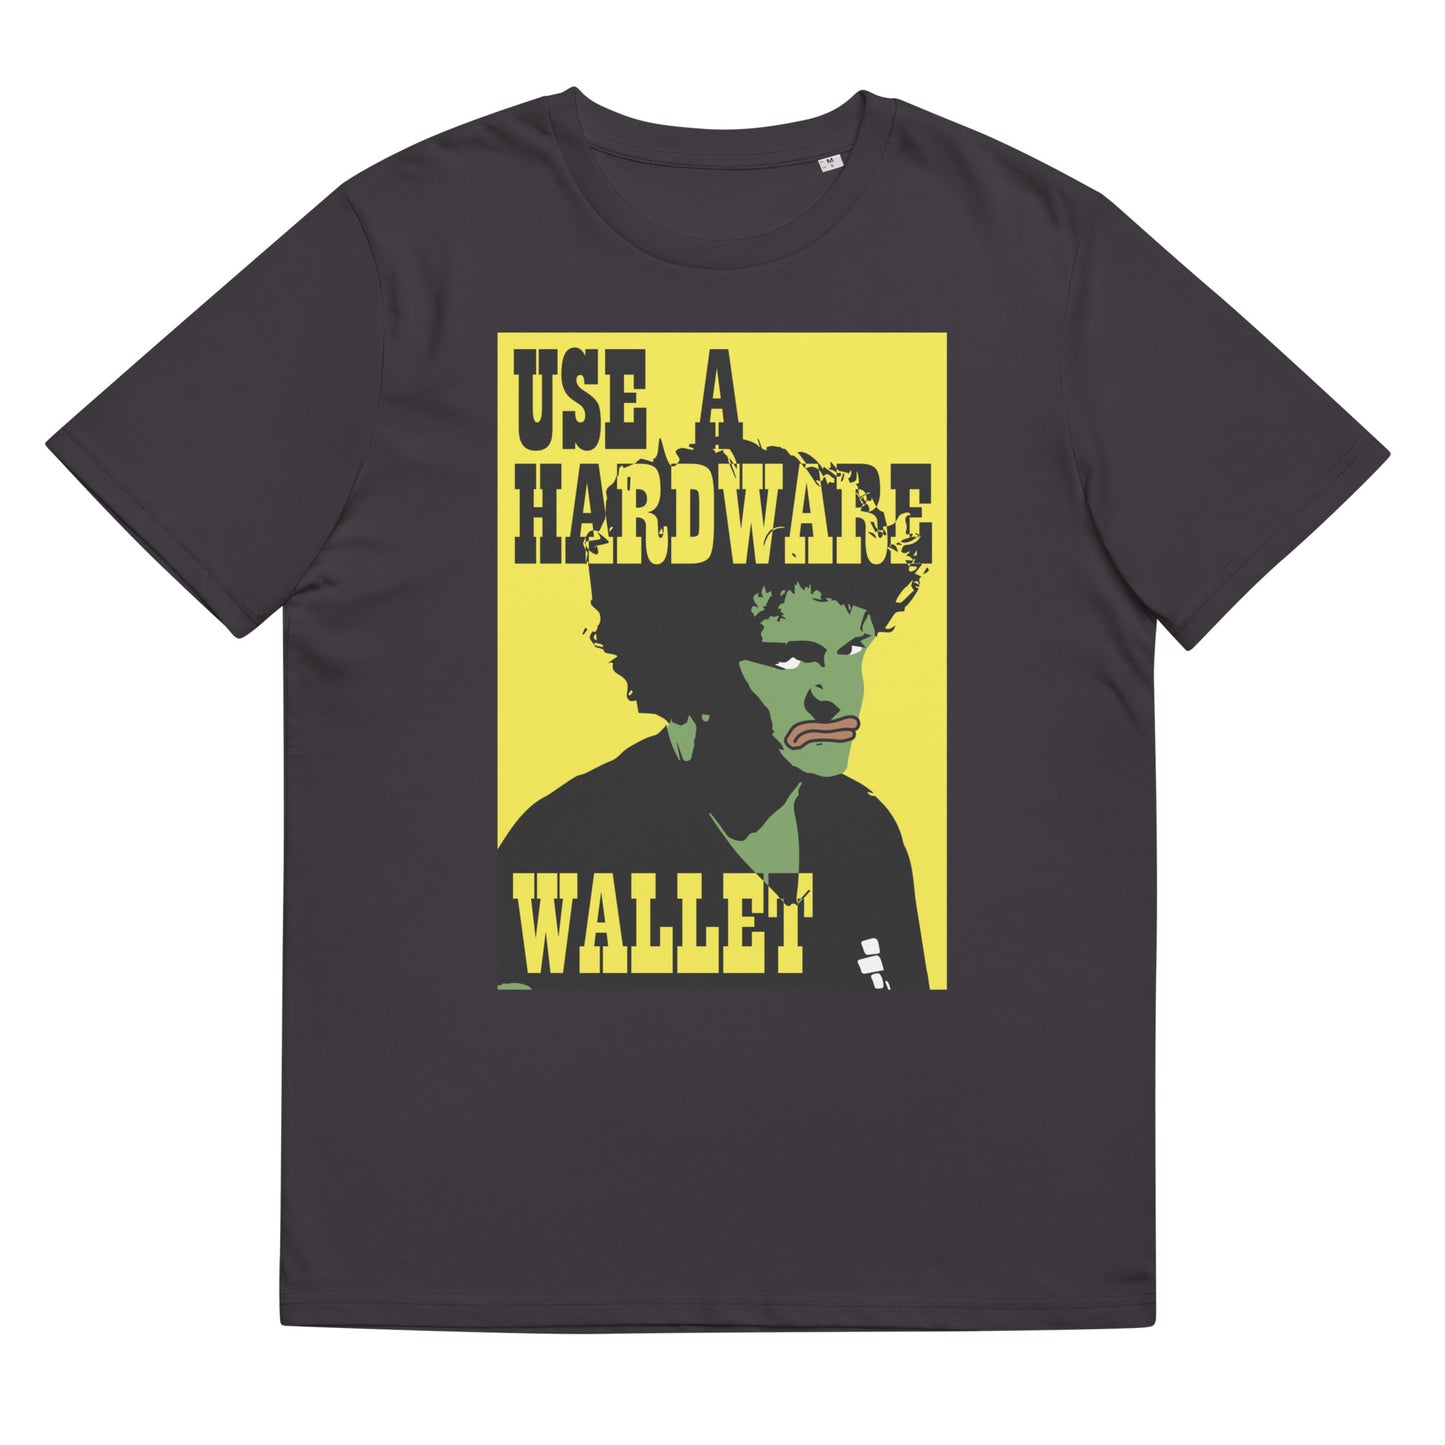 use-hardware-wallet-t-shirt-anthracite